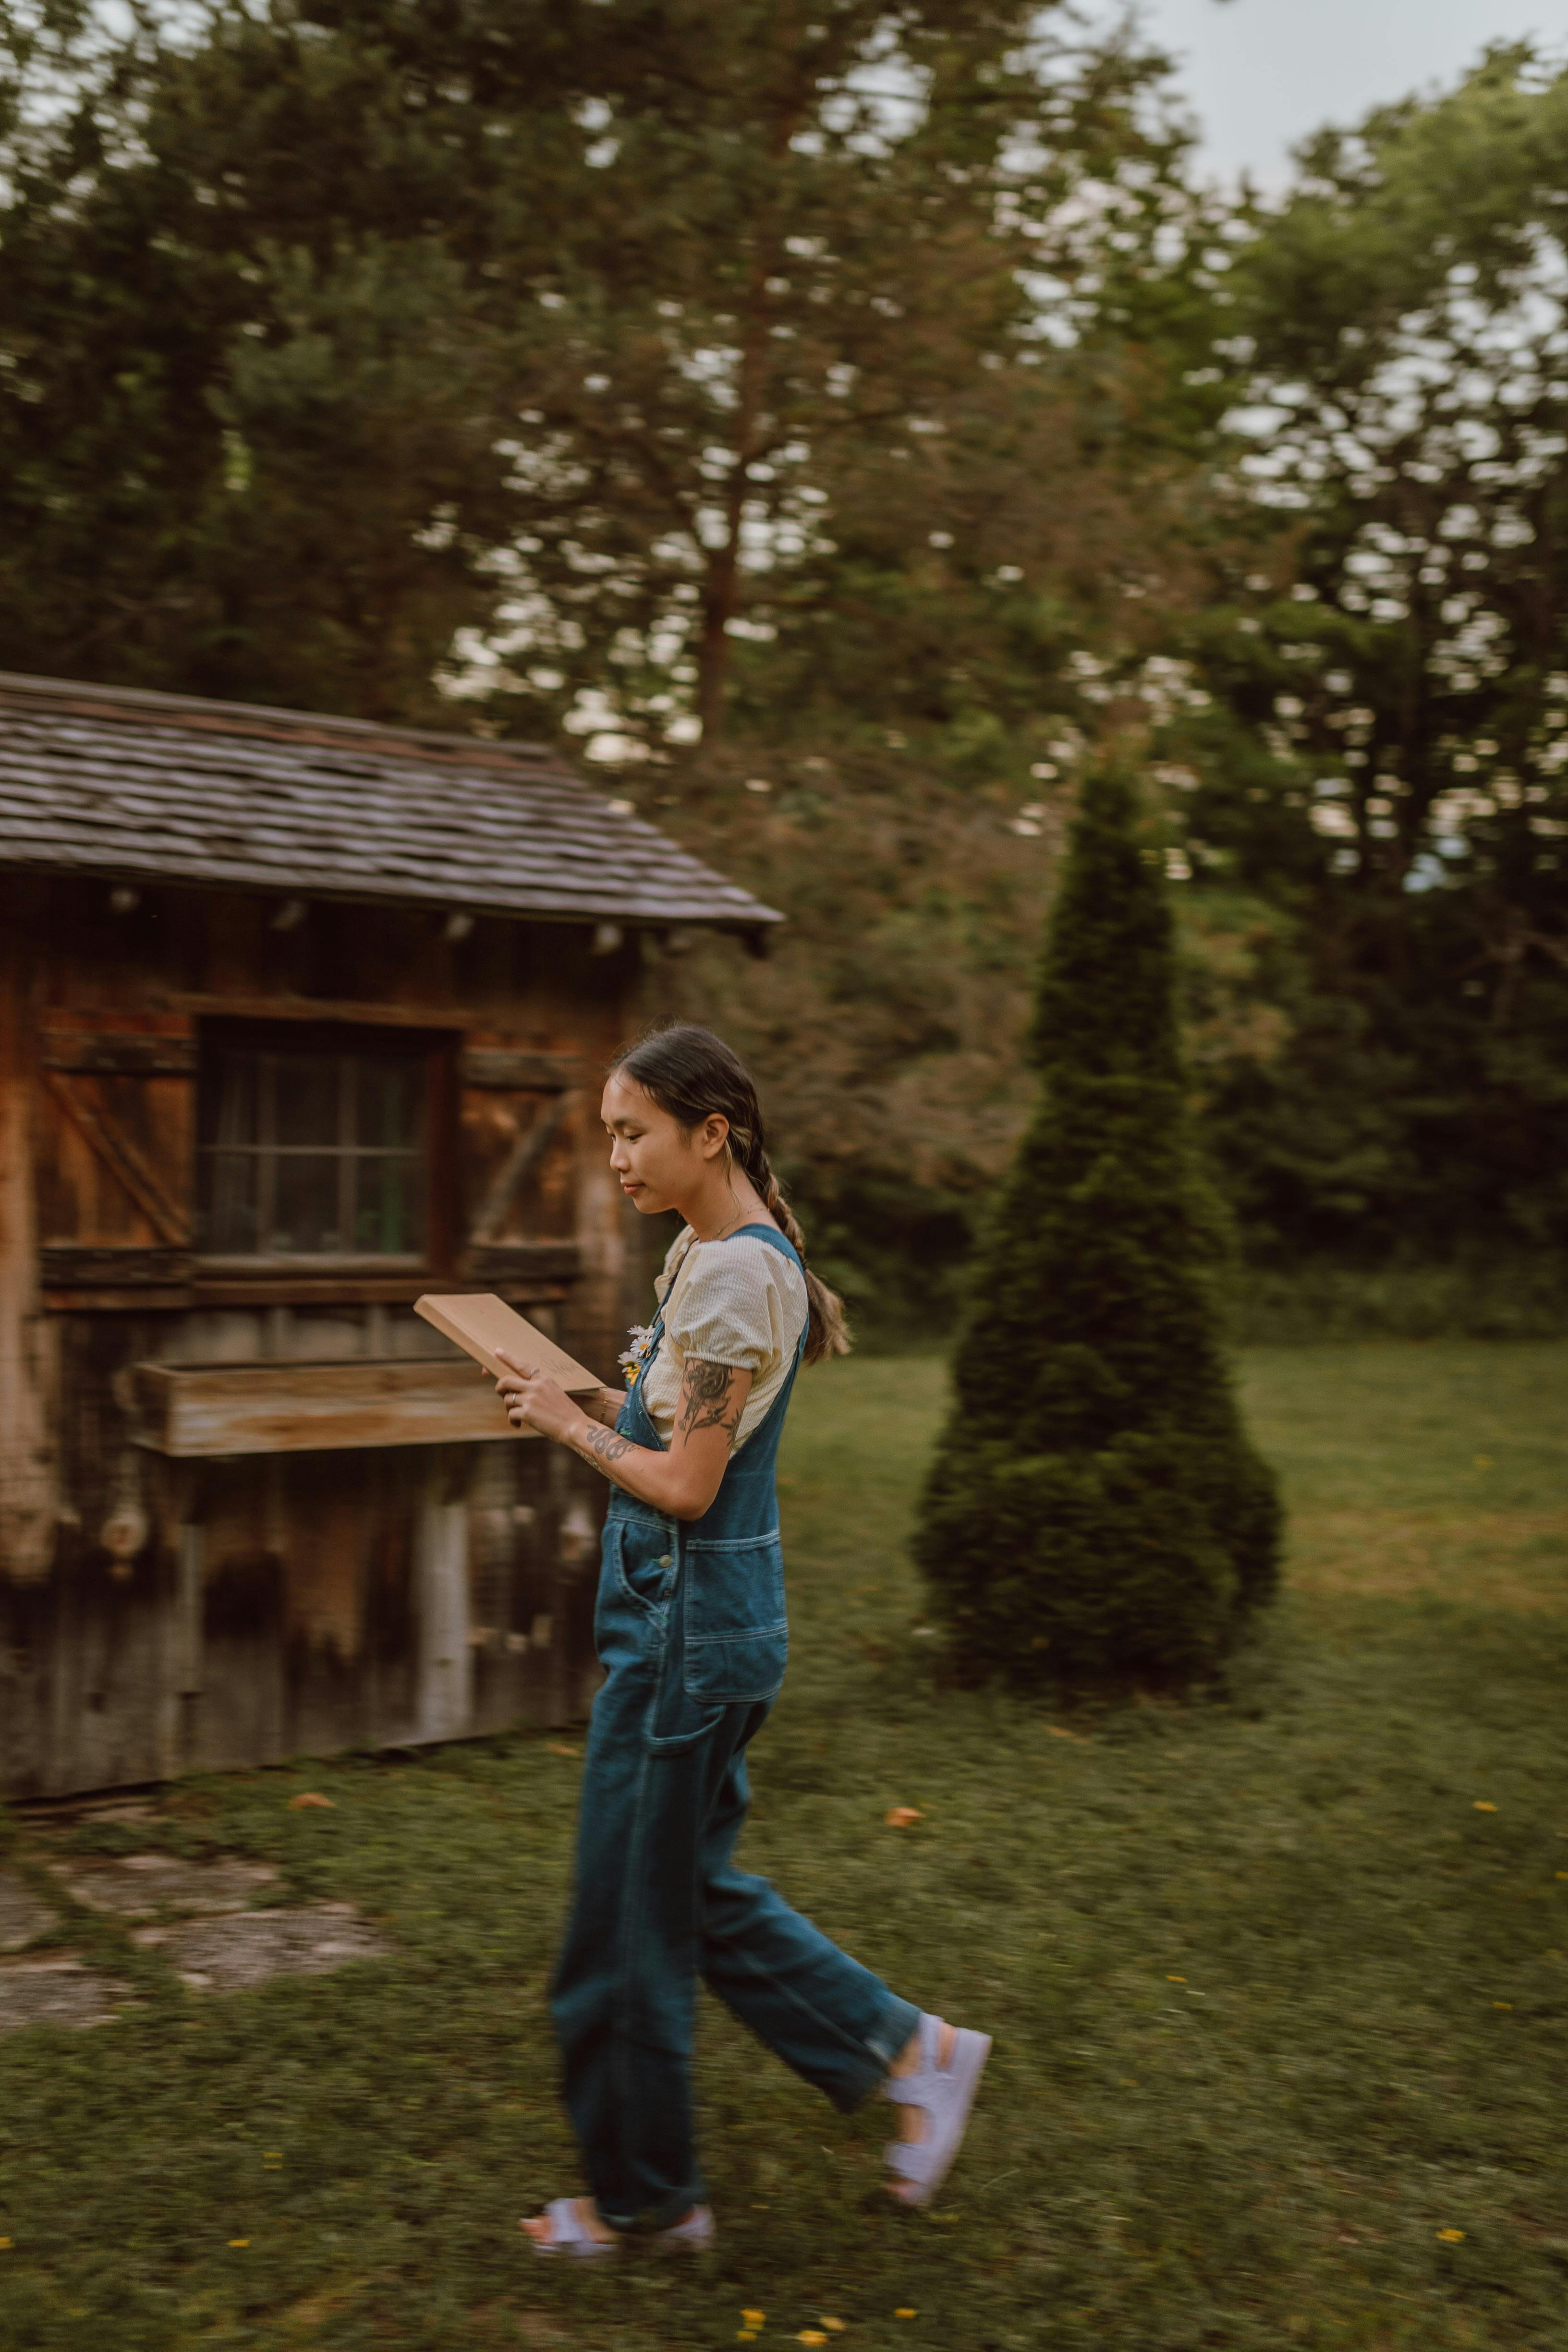 woman in denim overall walking on grass near barn and holding a book